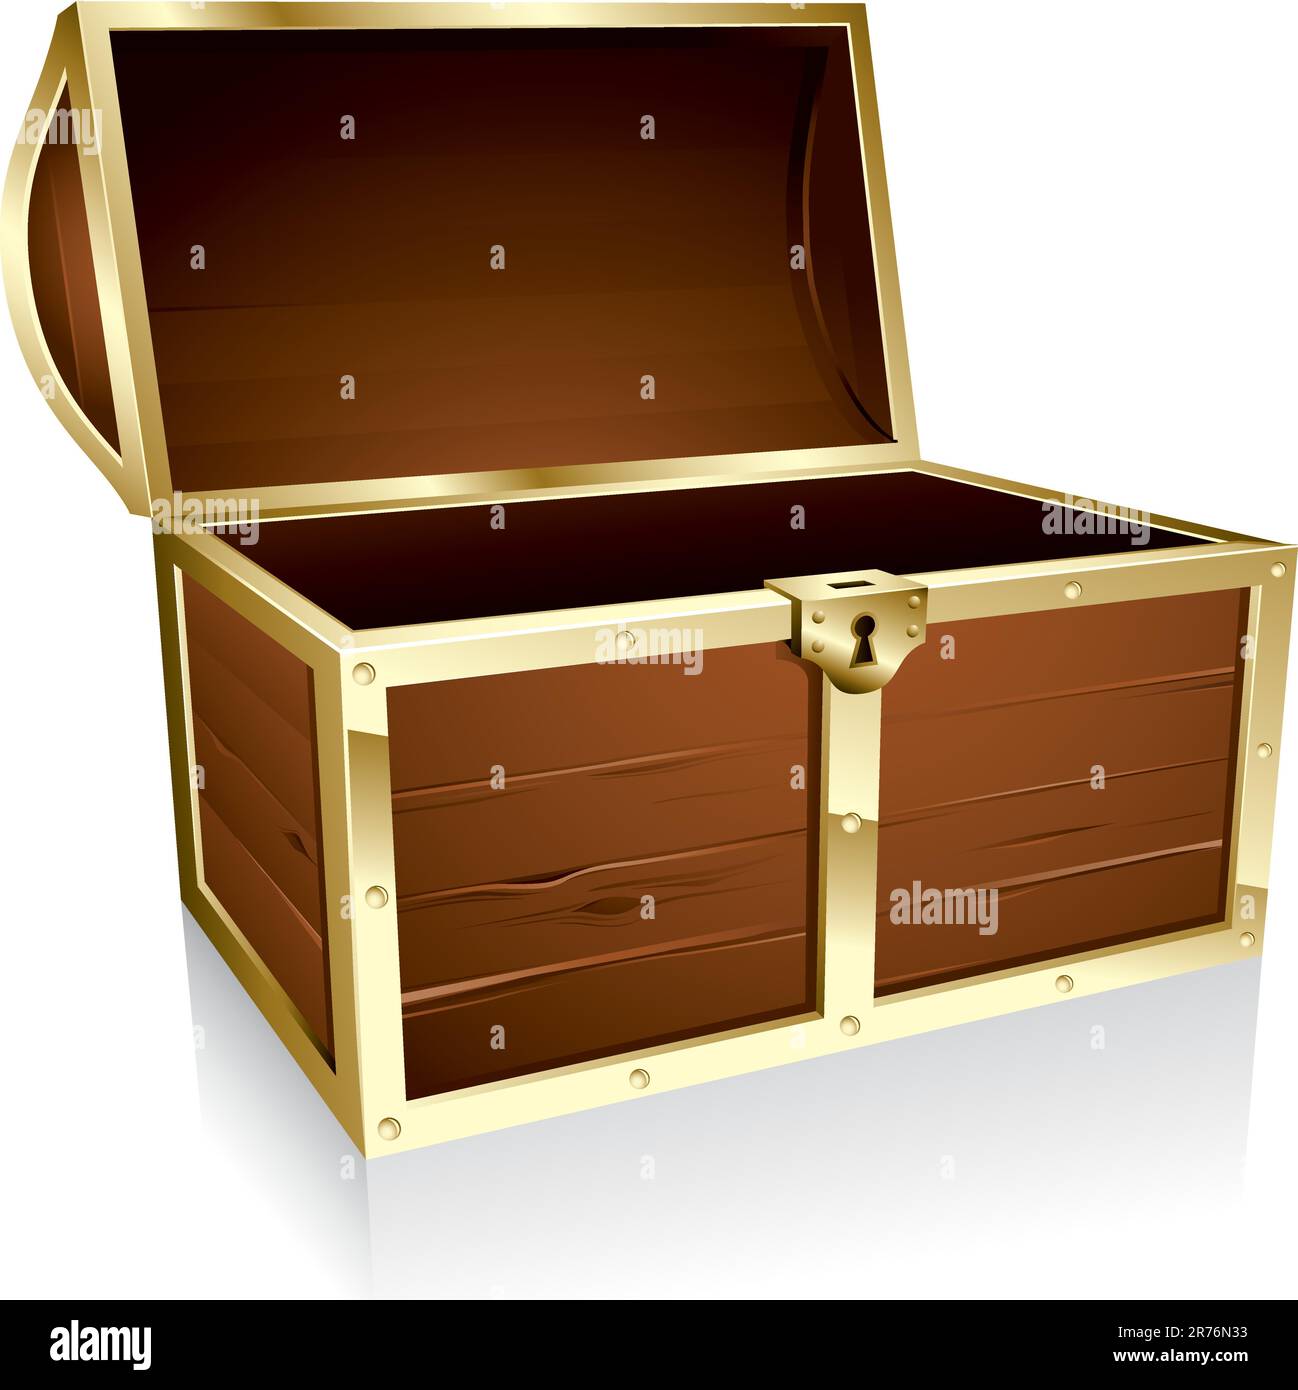 Illustration of a wooden treasure chest with nothing in it Stock Vector